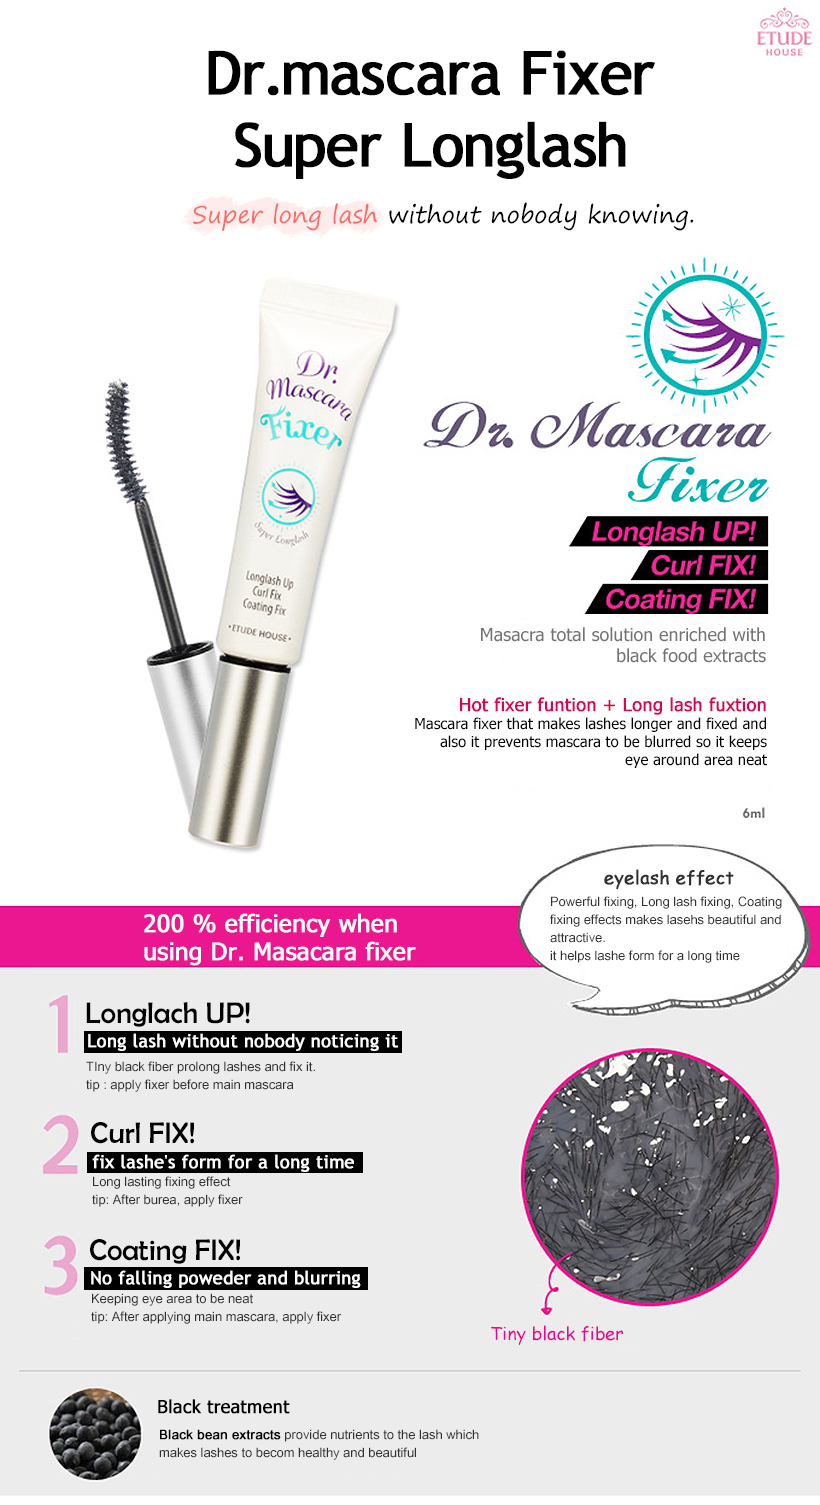 Dr. Mascara Fixer for Super Longlash 6ml How to use Description Ingredients